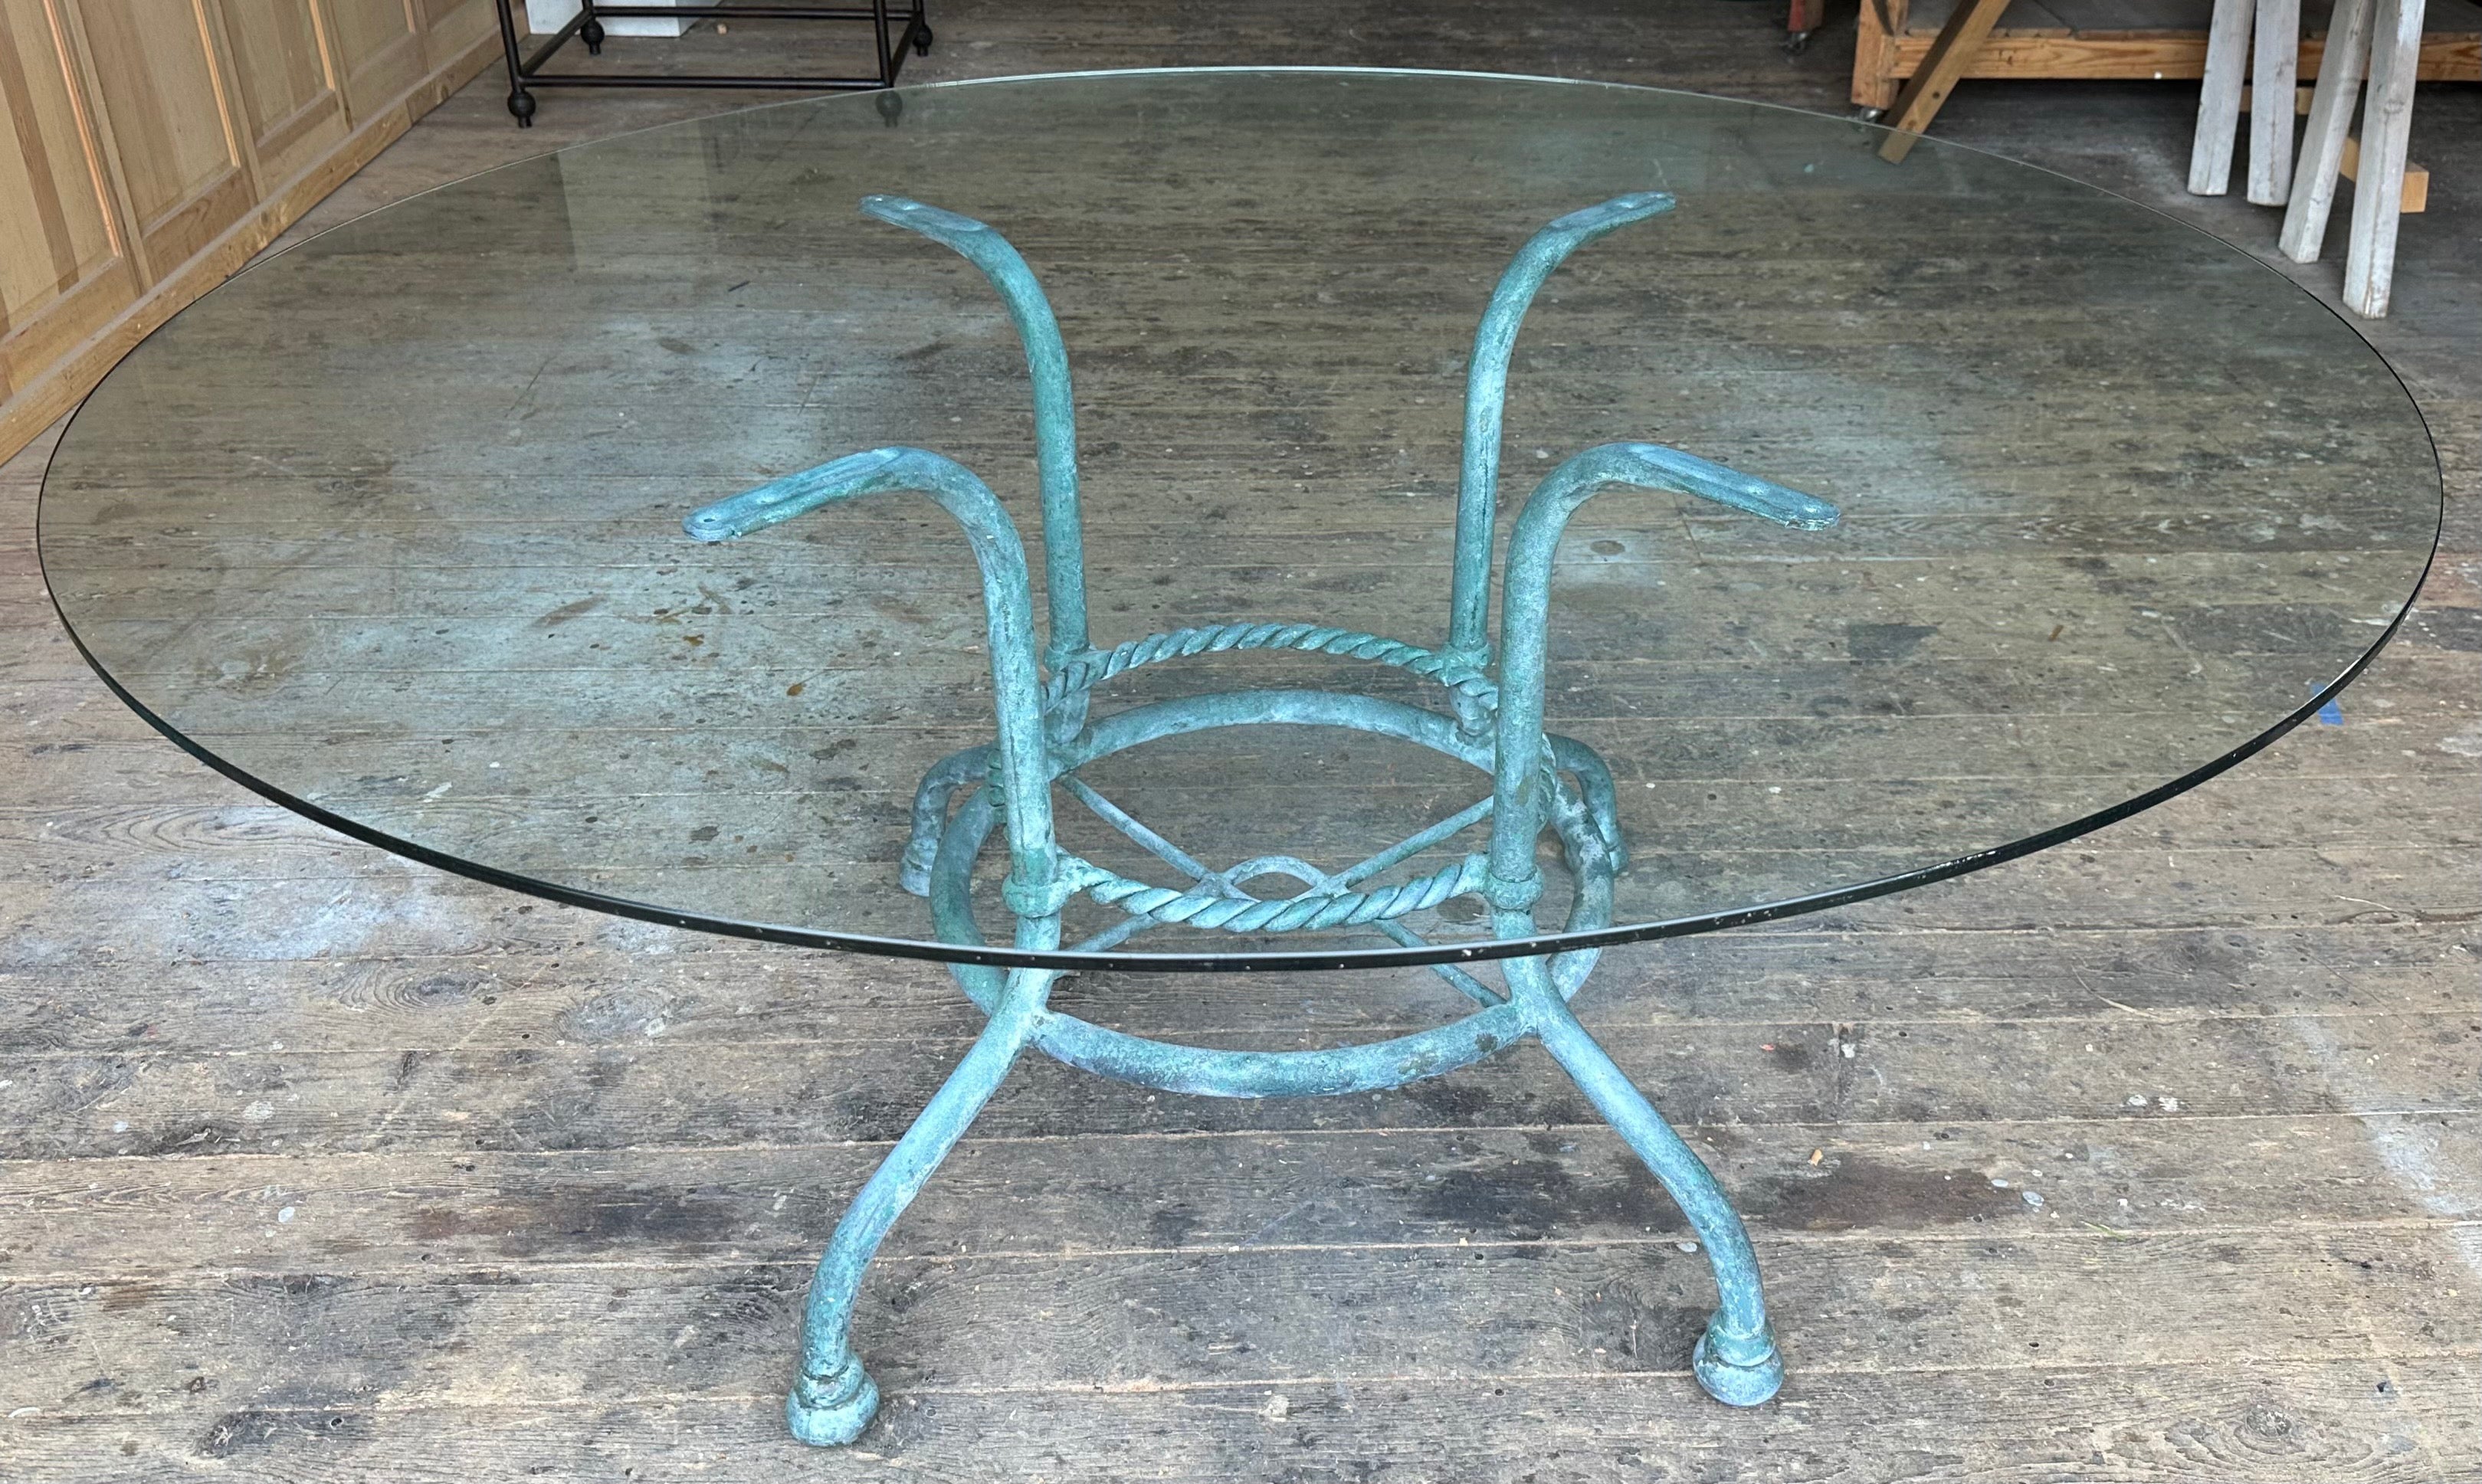 Beautifully styled Mid-Century Modern Round dining table base in cast 
aluminum with roping detail -- wonderful weathered faux finish with a great aged patina look.
Use it with a glass top with or without a center hole for an umbrella.  Table can be